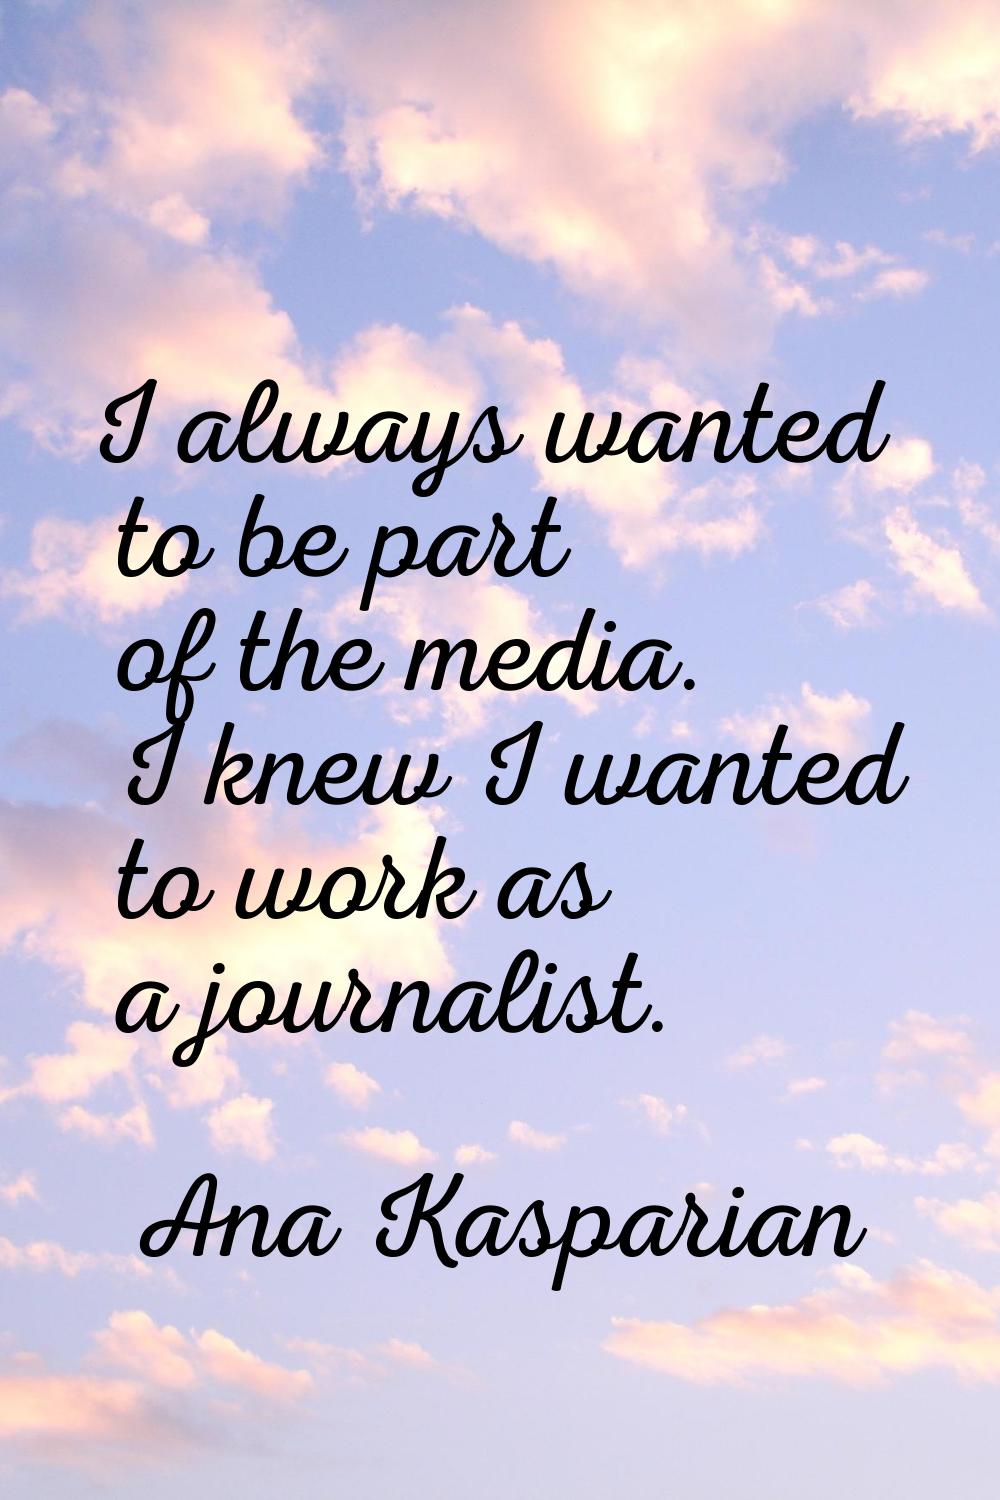 I always wanted to be part of the media. I knew I wanted to work as a journalist.